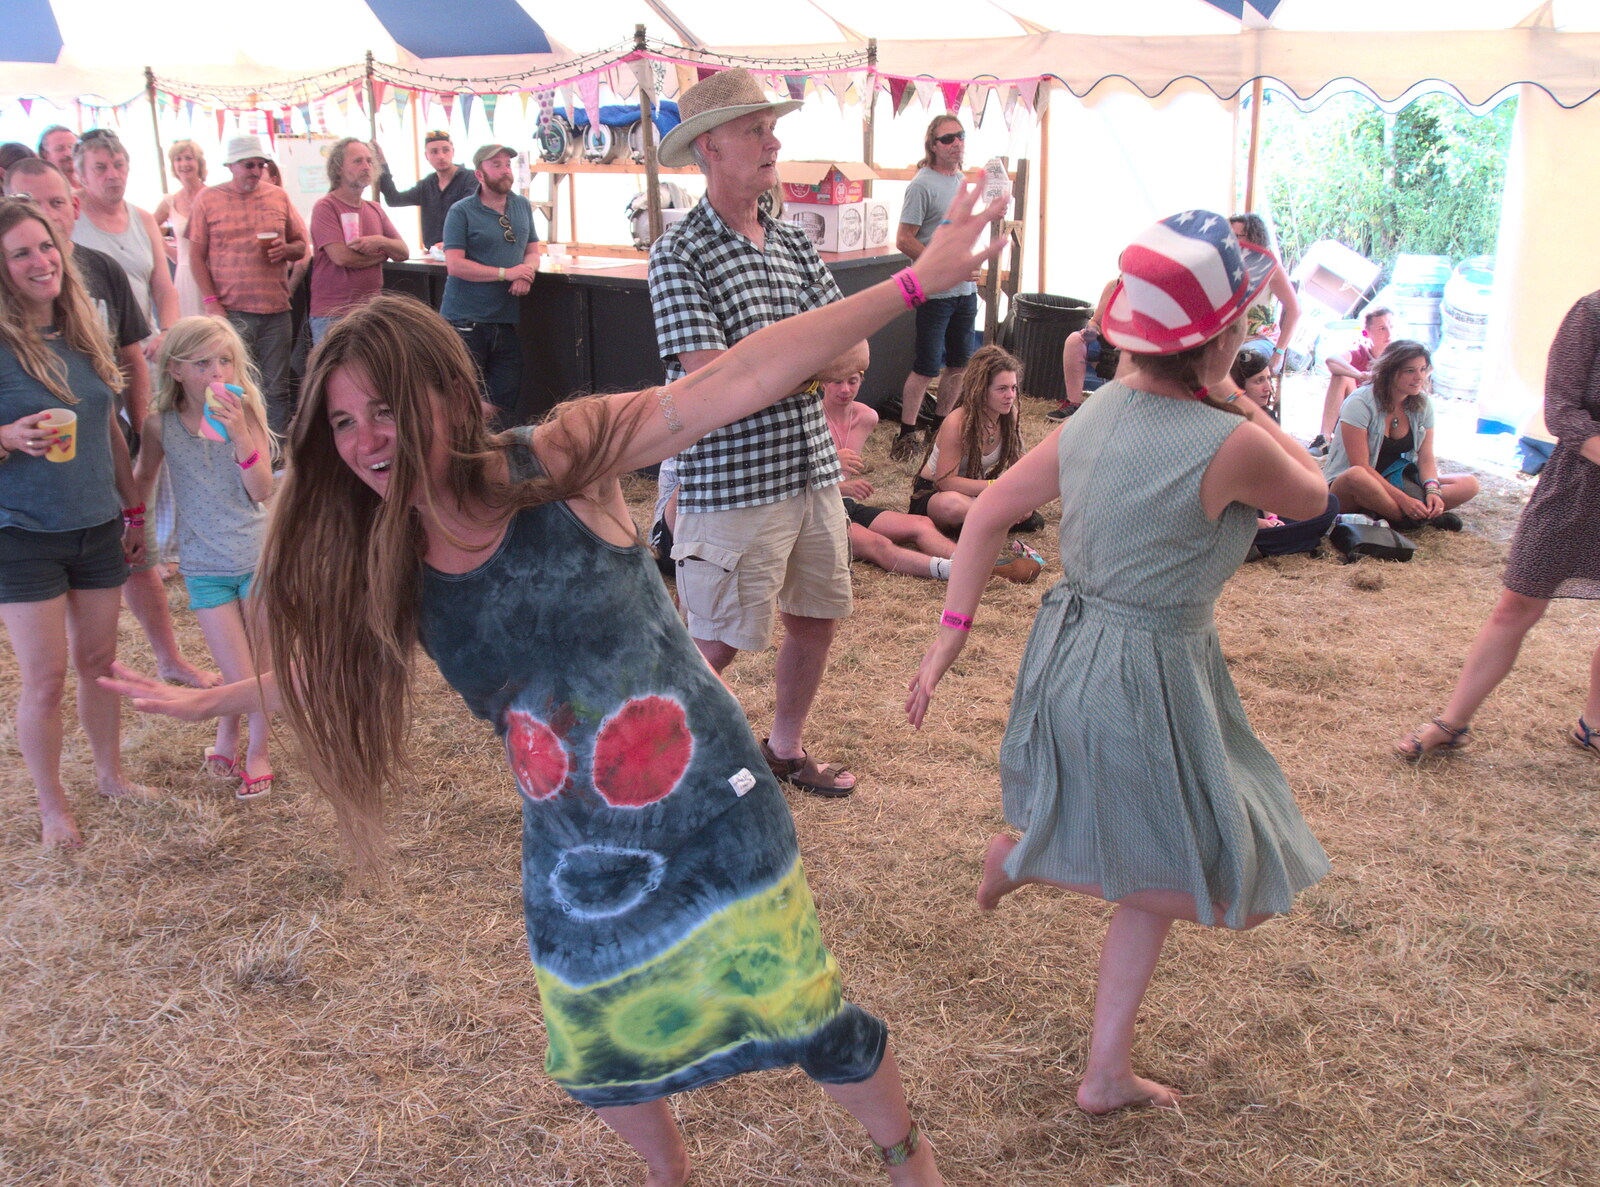 There's some mad dancing going on from WoW Festival, Burston, Norfolk - 29th June - 1st July 2018